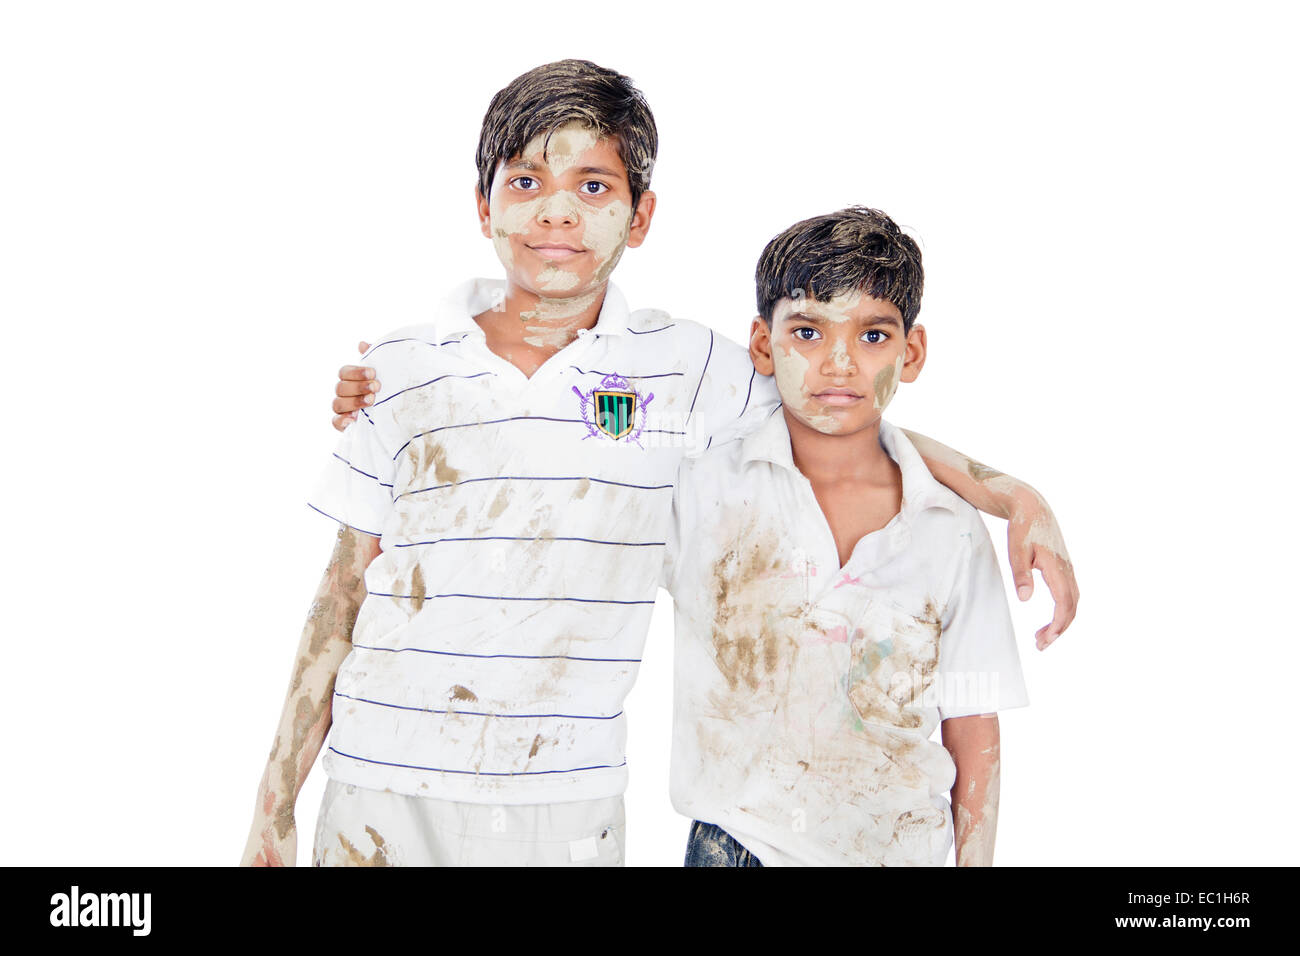 2 indans kids boys Friends Arm around standing Dirty Clothes Stock Photo